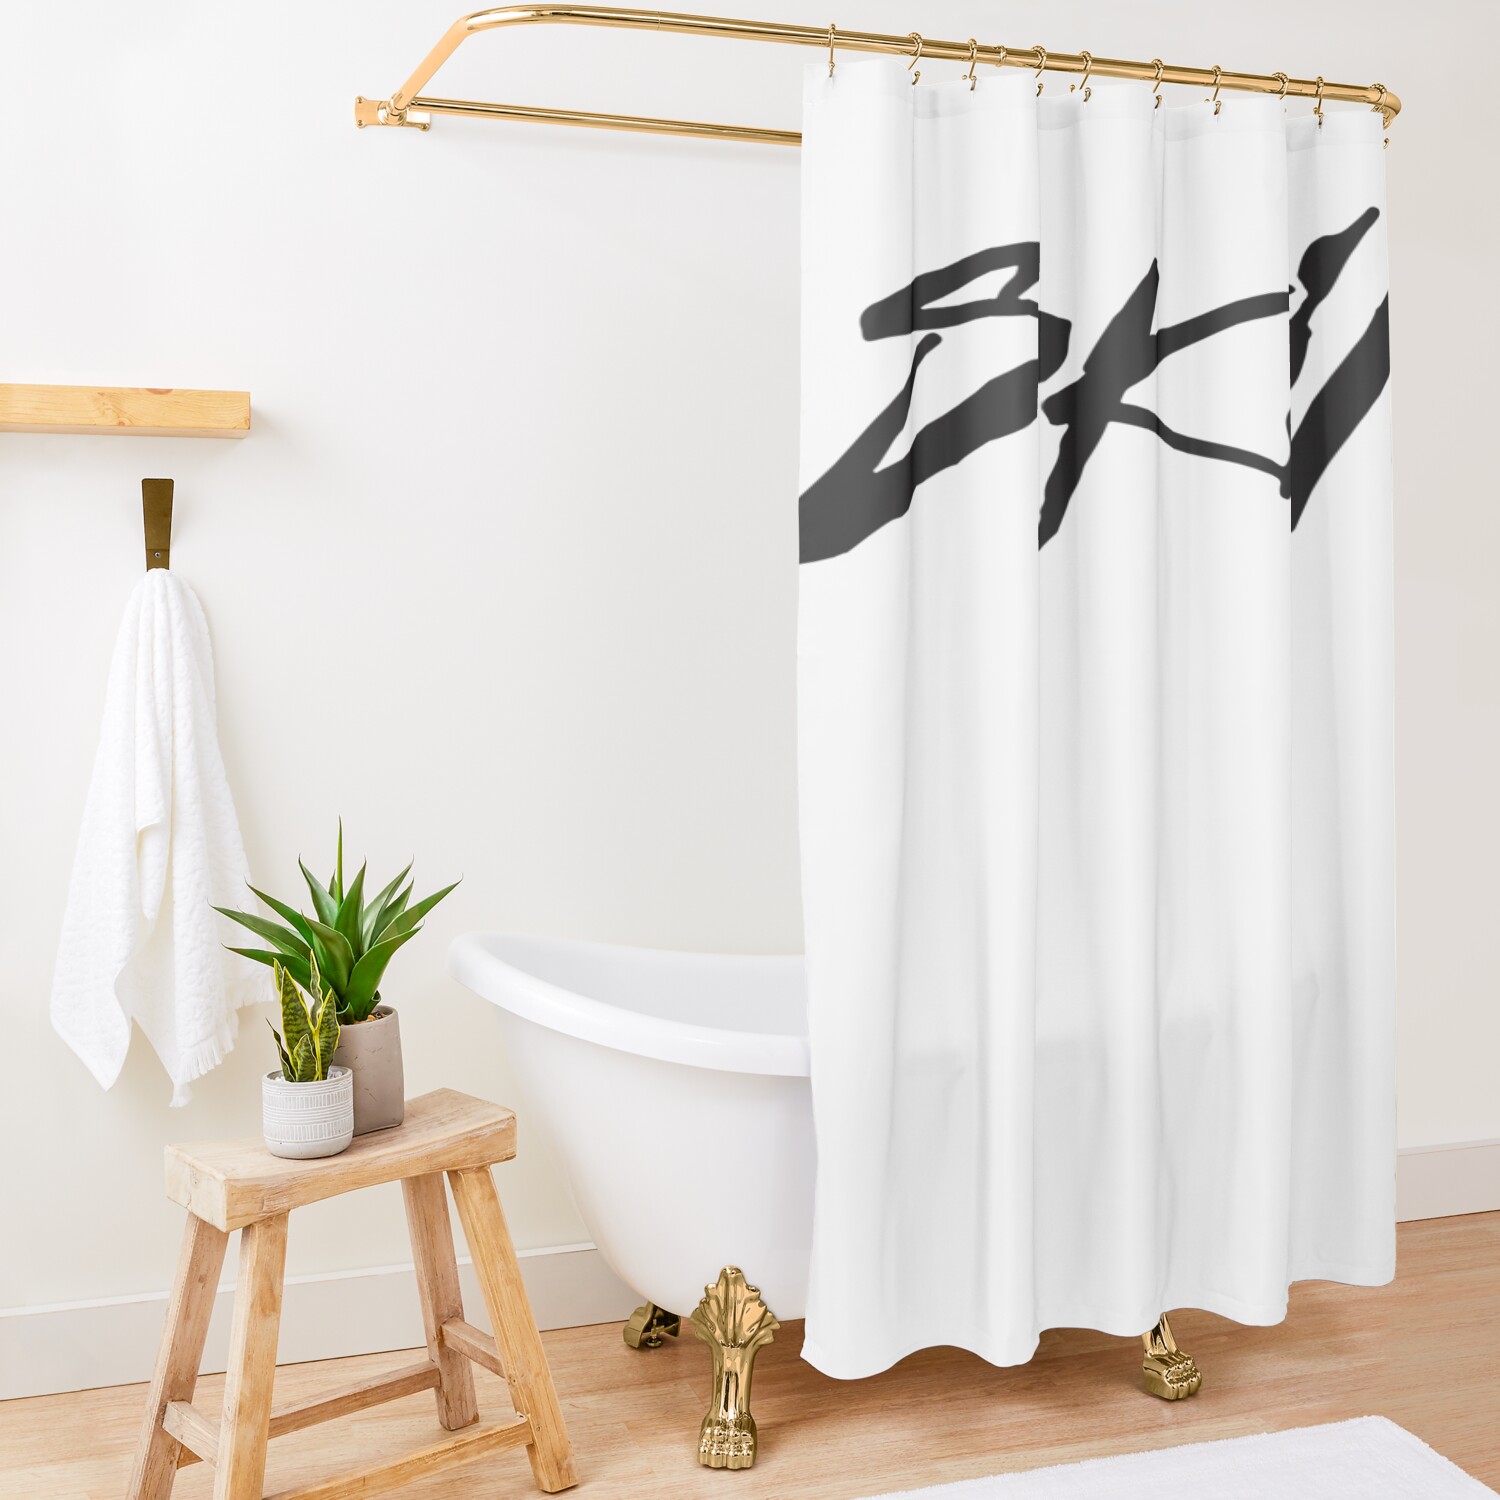 urshower curtain opensquare1500x1500 6 - Sam And Colby Shop